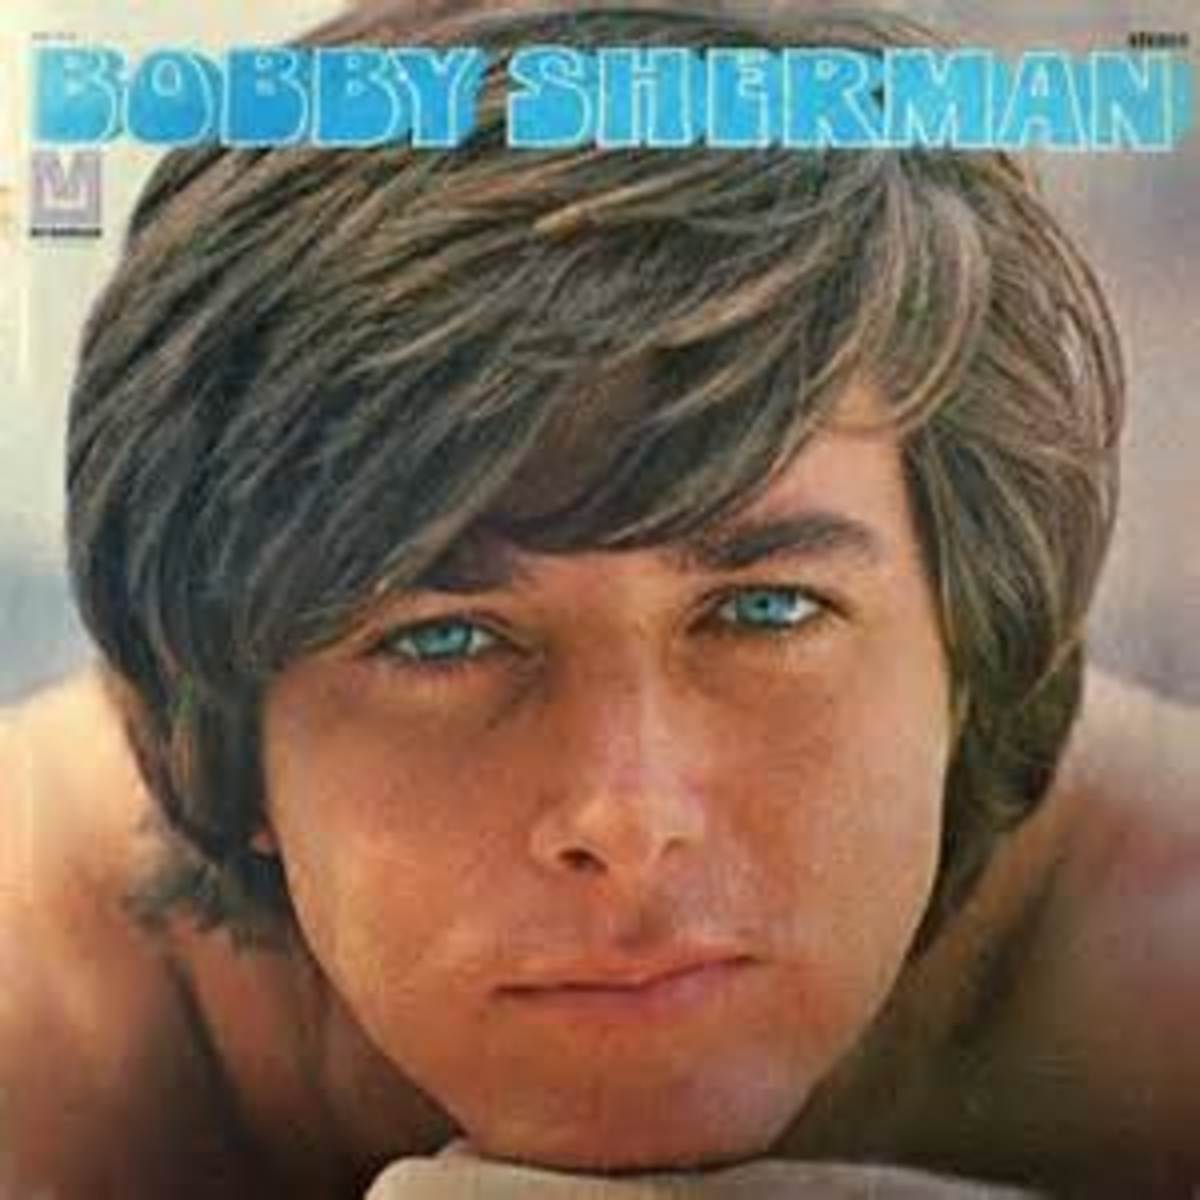 What ever happened to Bobby Sherman?